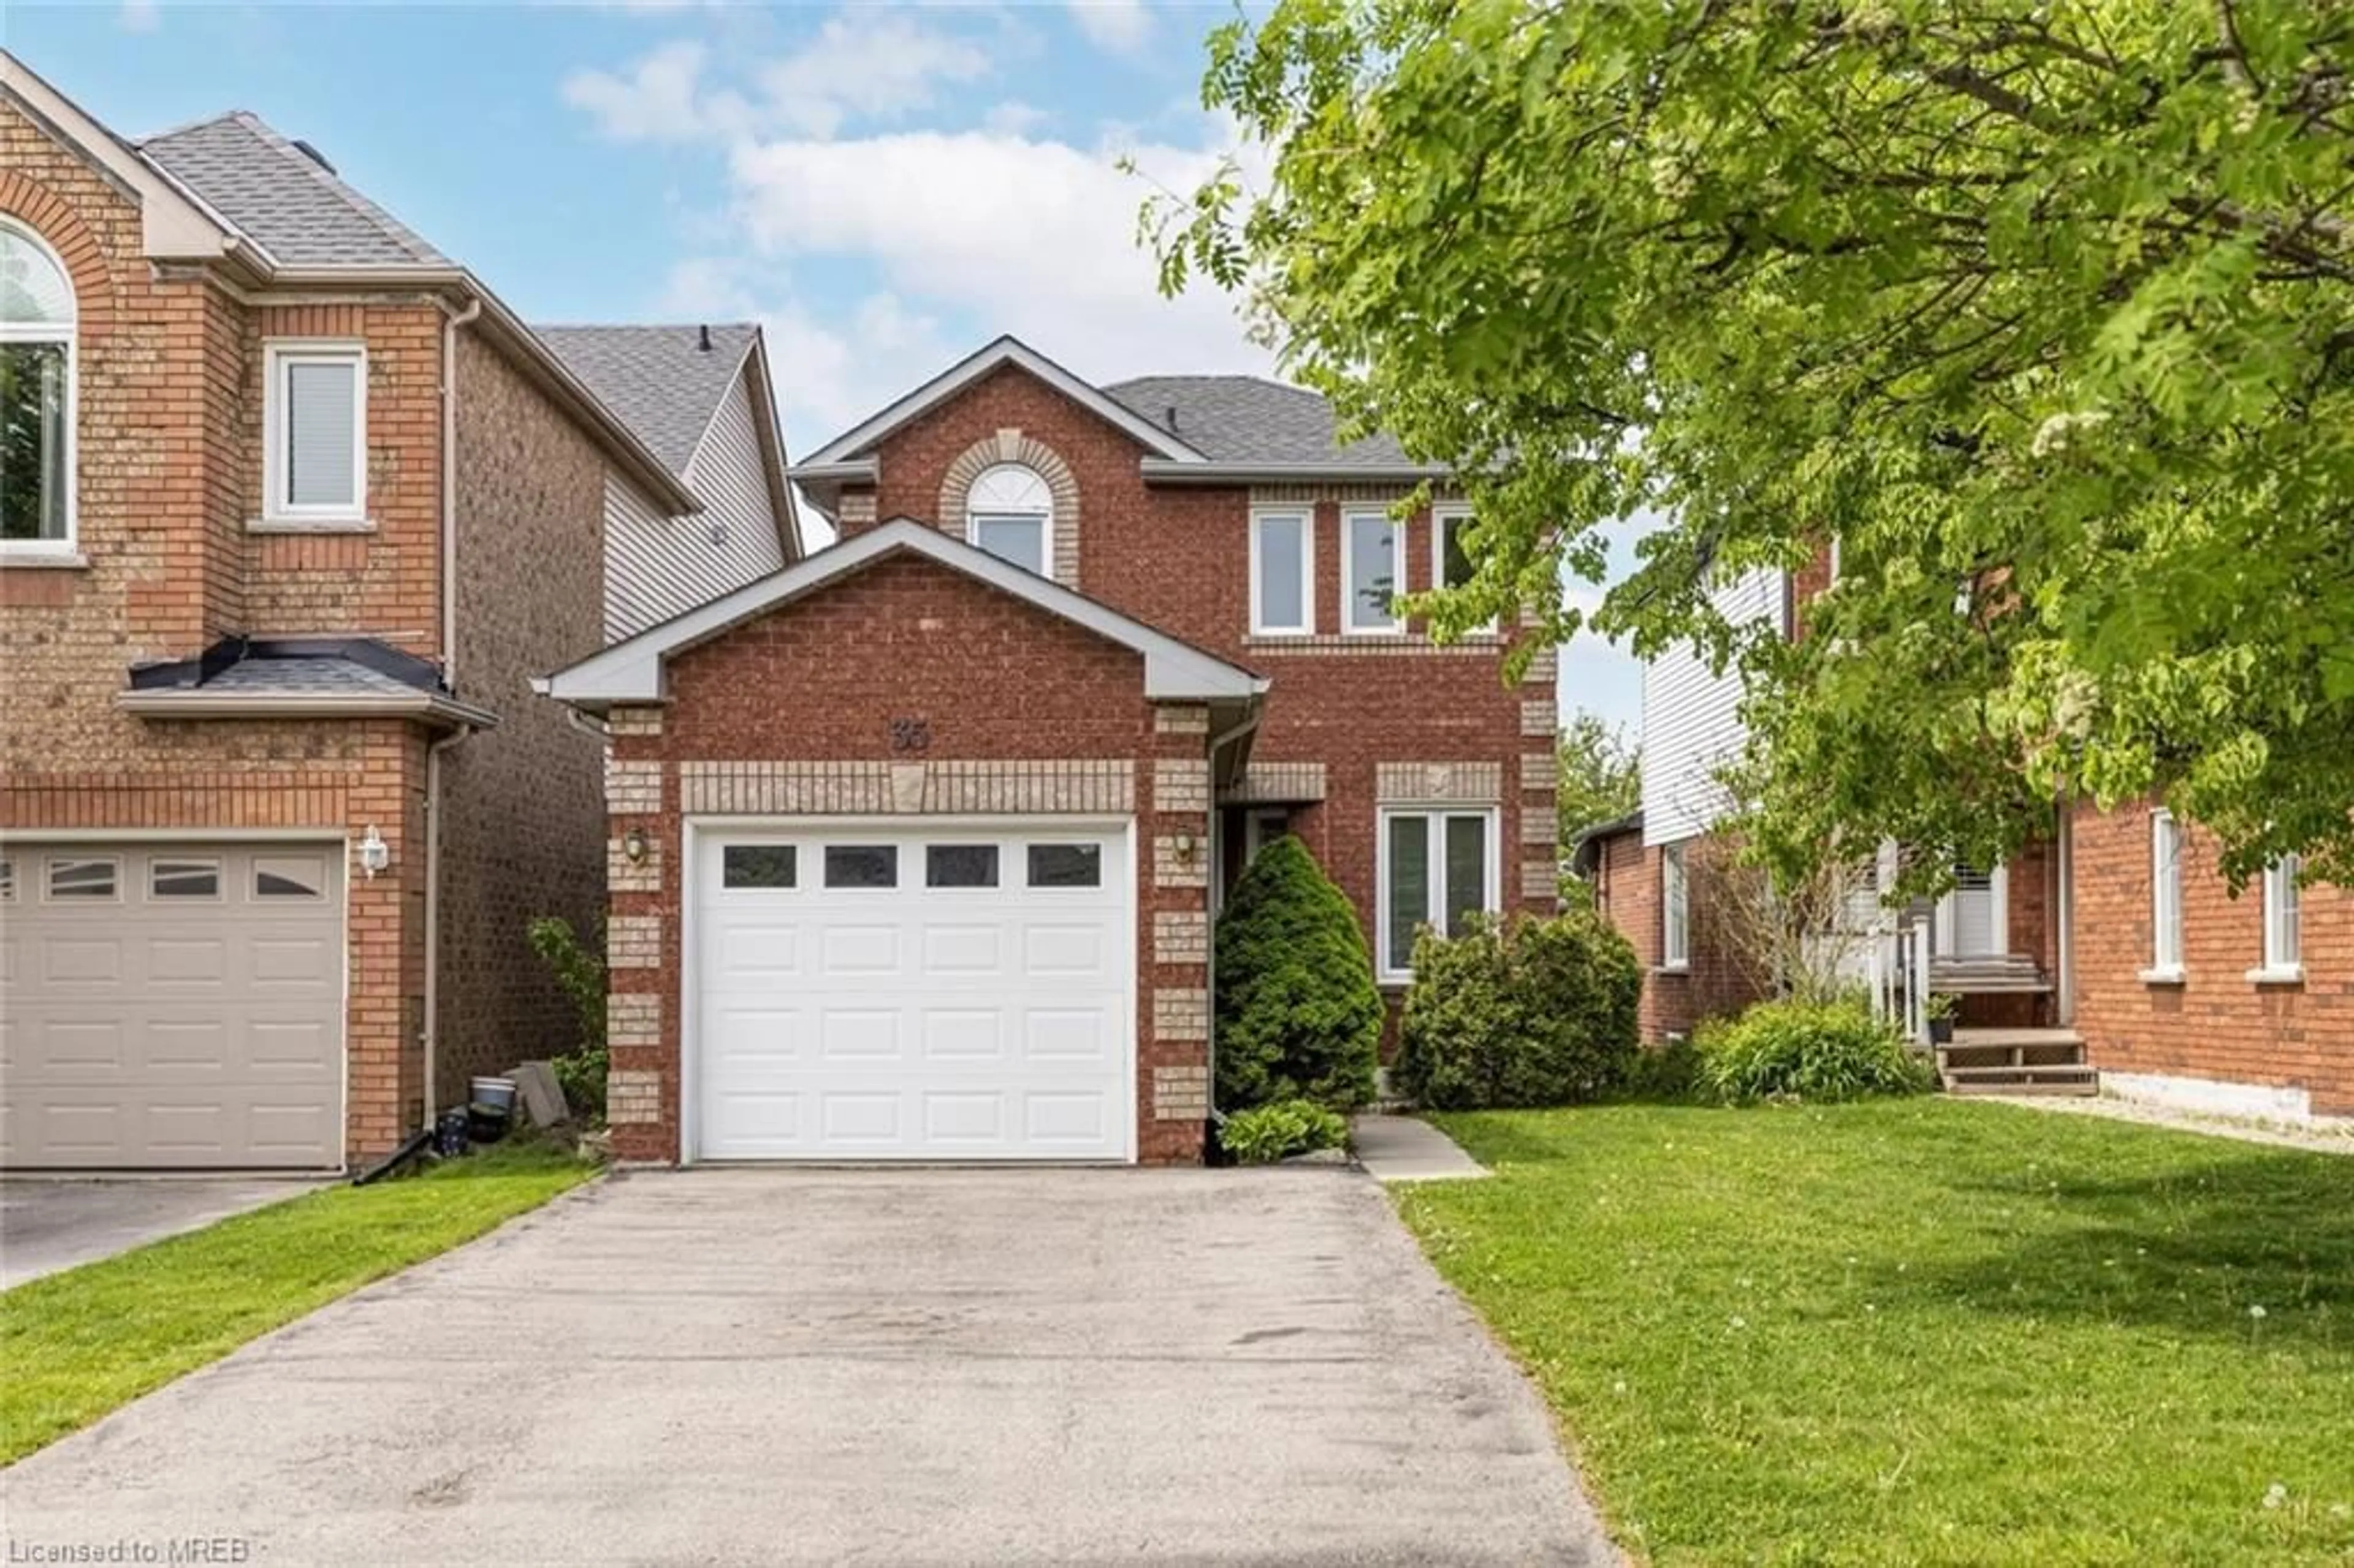 Home with brick exterior material for 35 Chatsworth Cres, Waterdown Ontario L0R 2H5